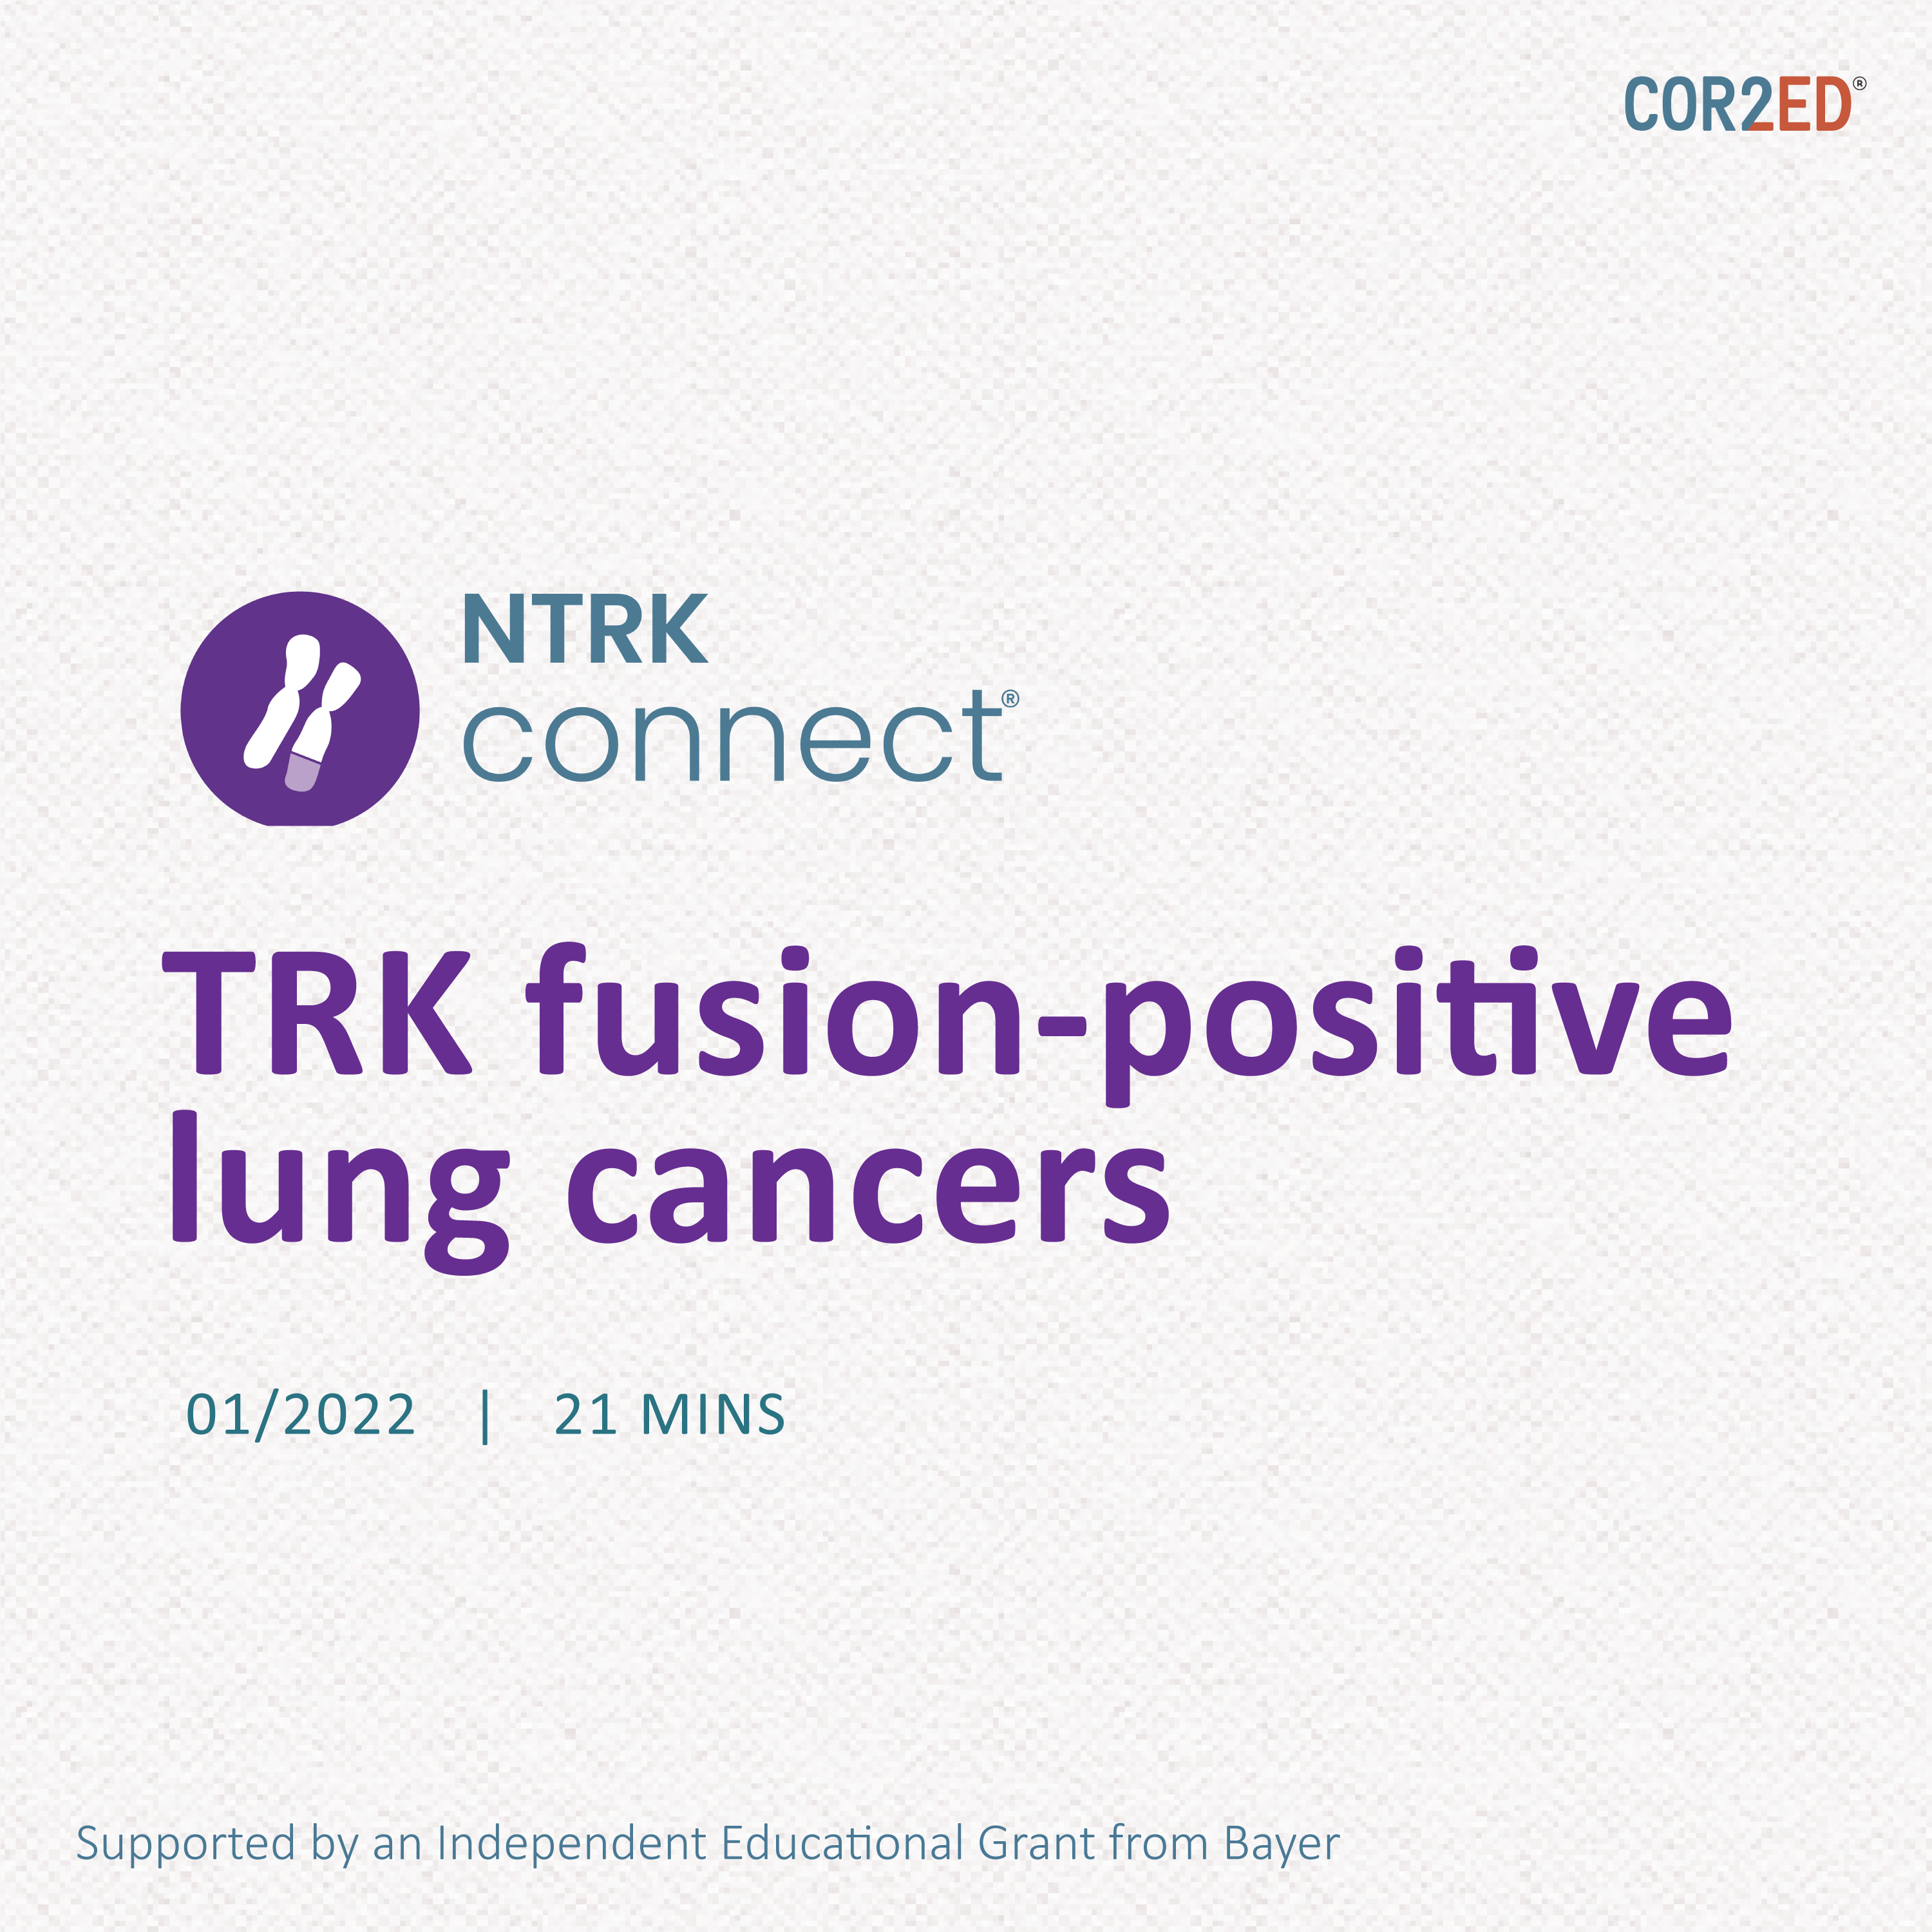 TRK fusion-positive lung cancers